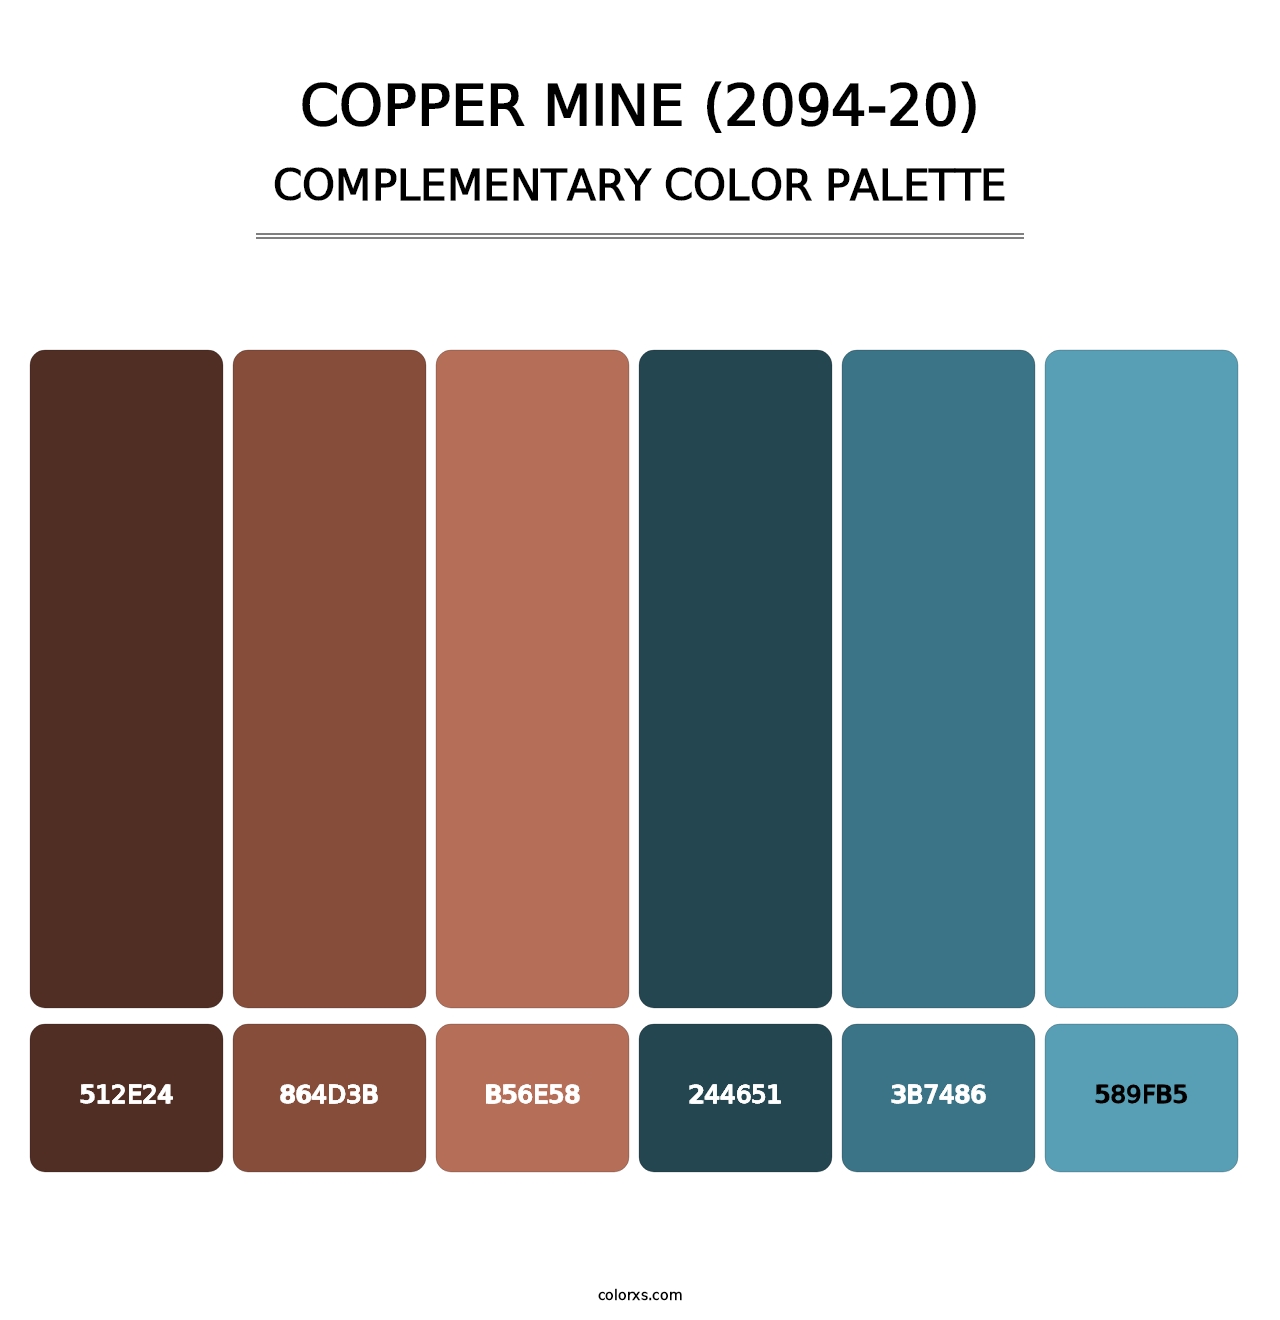 Copper Mine (2094-20) - Complementary Color Palette